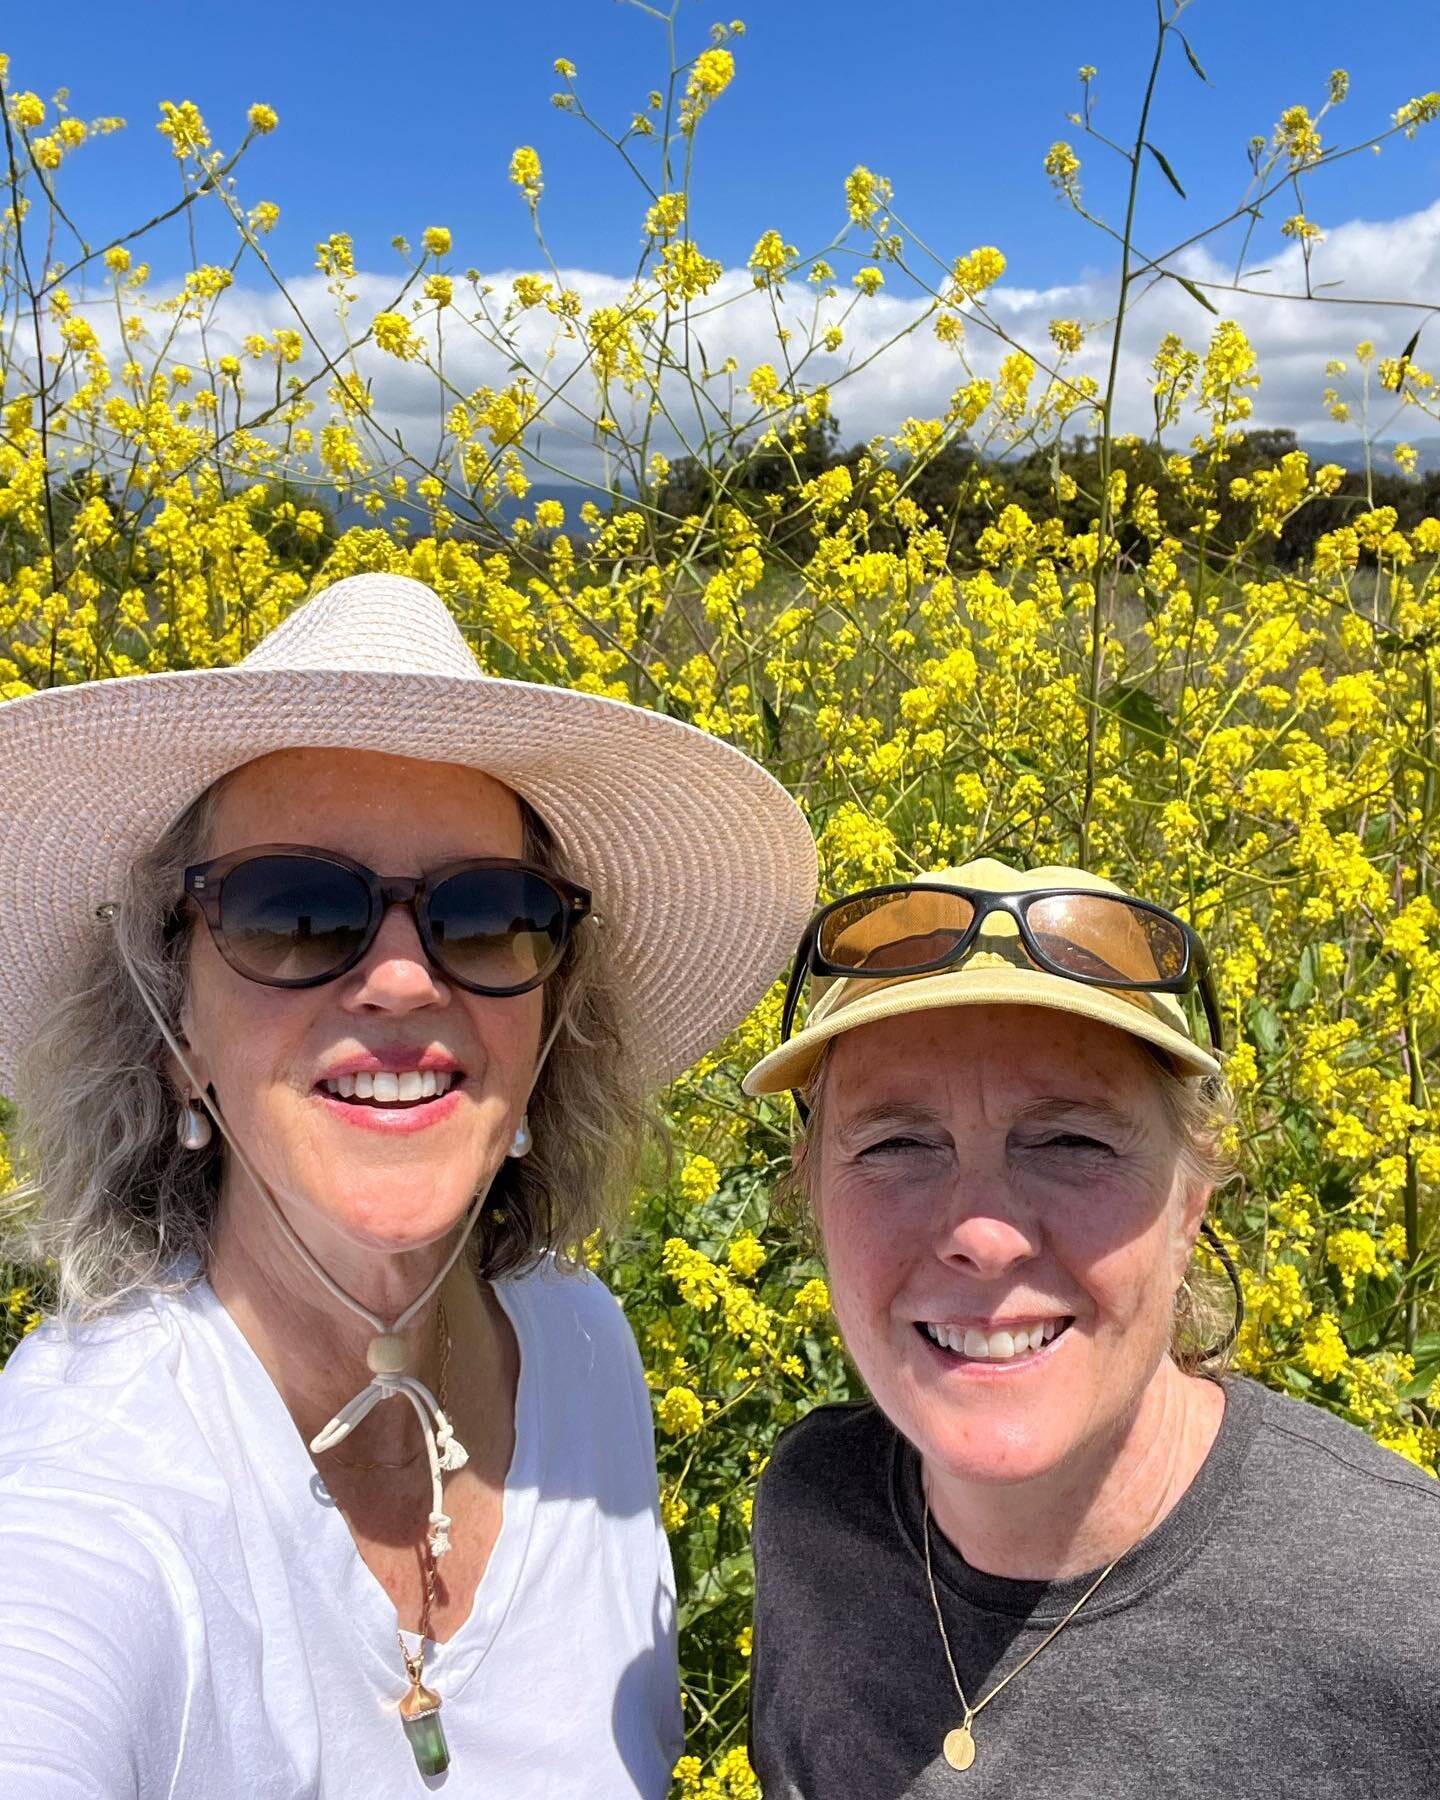 It took 7 miles of walkin&rsquo; and talkin&rsquo; it all out with my friend Sigrid to feel back at peace with the world. I call that major mental health practice! 

*
*

#resilientwomen #meditation #community #santabarbara #goleta #farming #farmlife